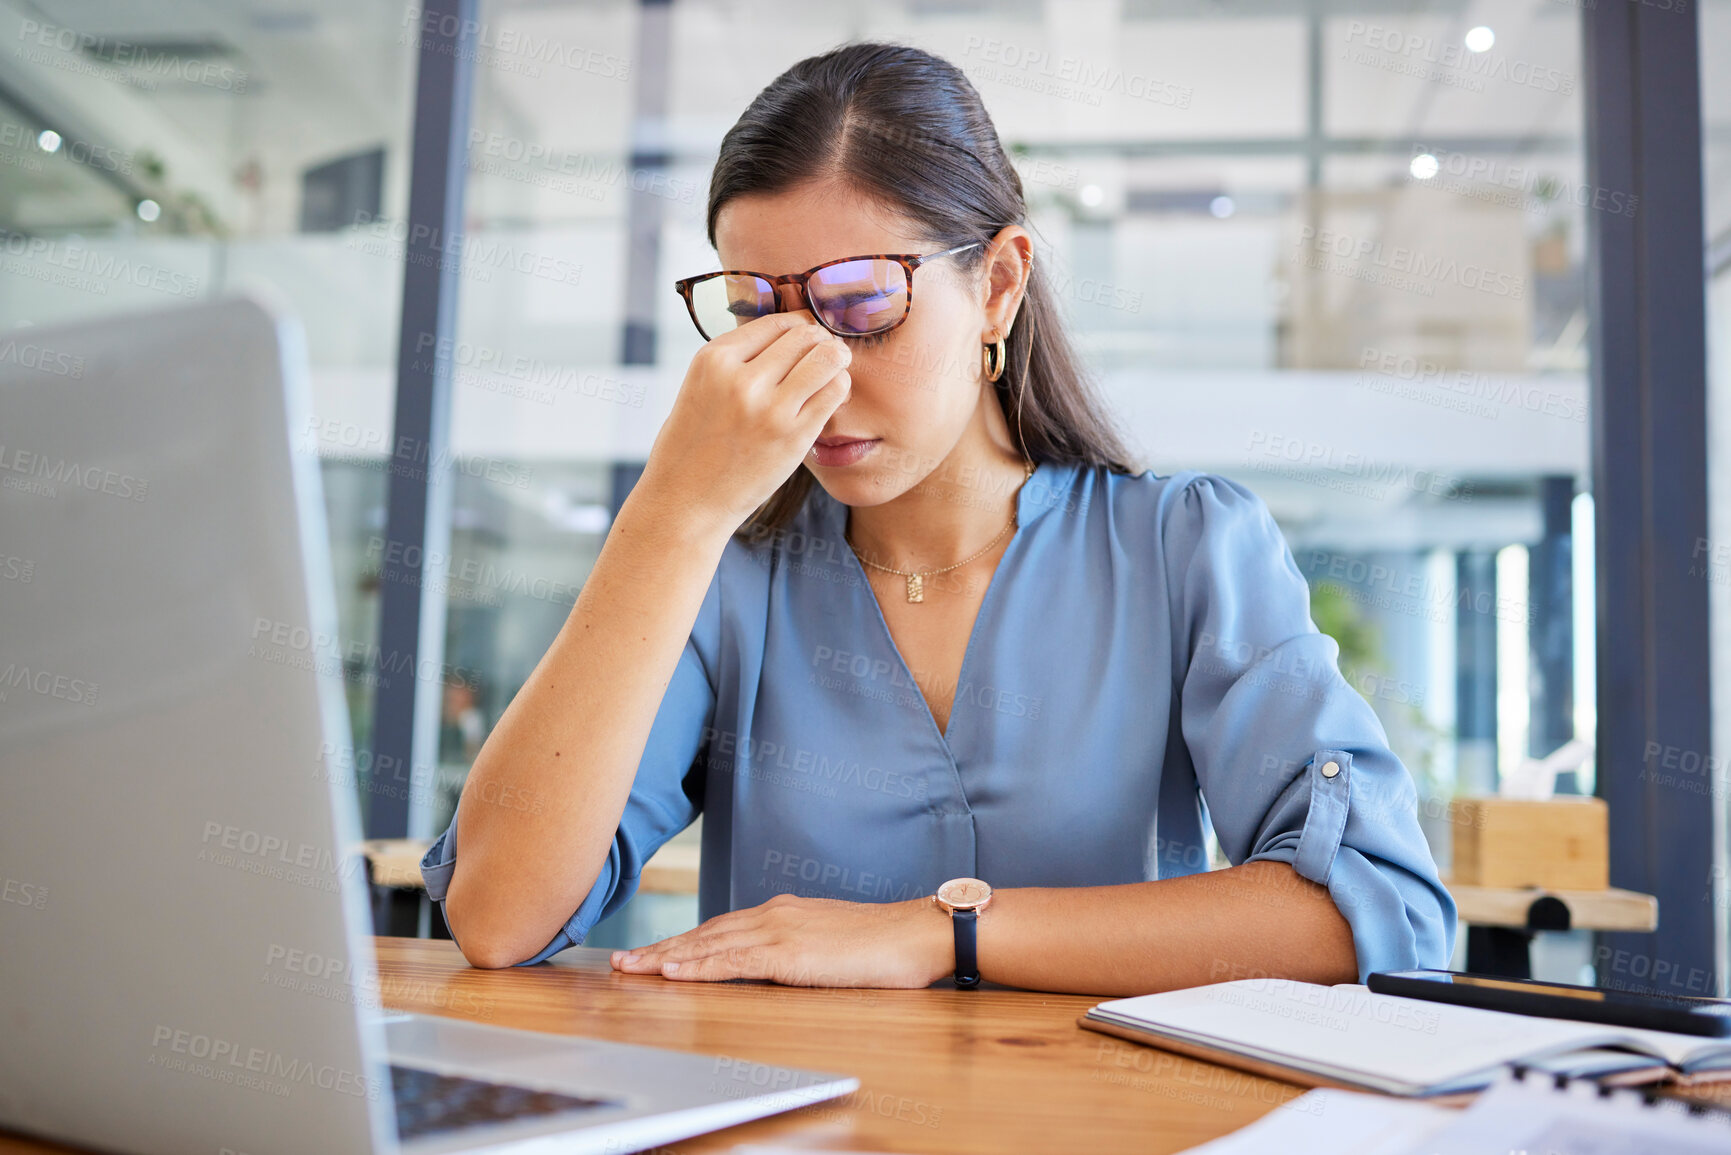 Buy stock photo Stress headache, burnout and woman in office overwhelmed with workload at desk with laptop. Frustrated, overworked and tired woman with computer at startup, anxiety from deadline time pressure crisis